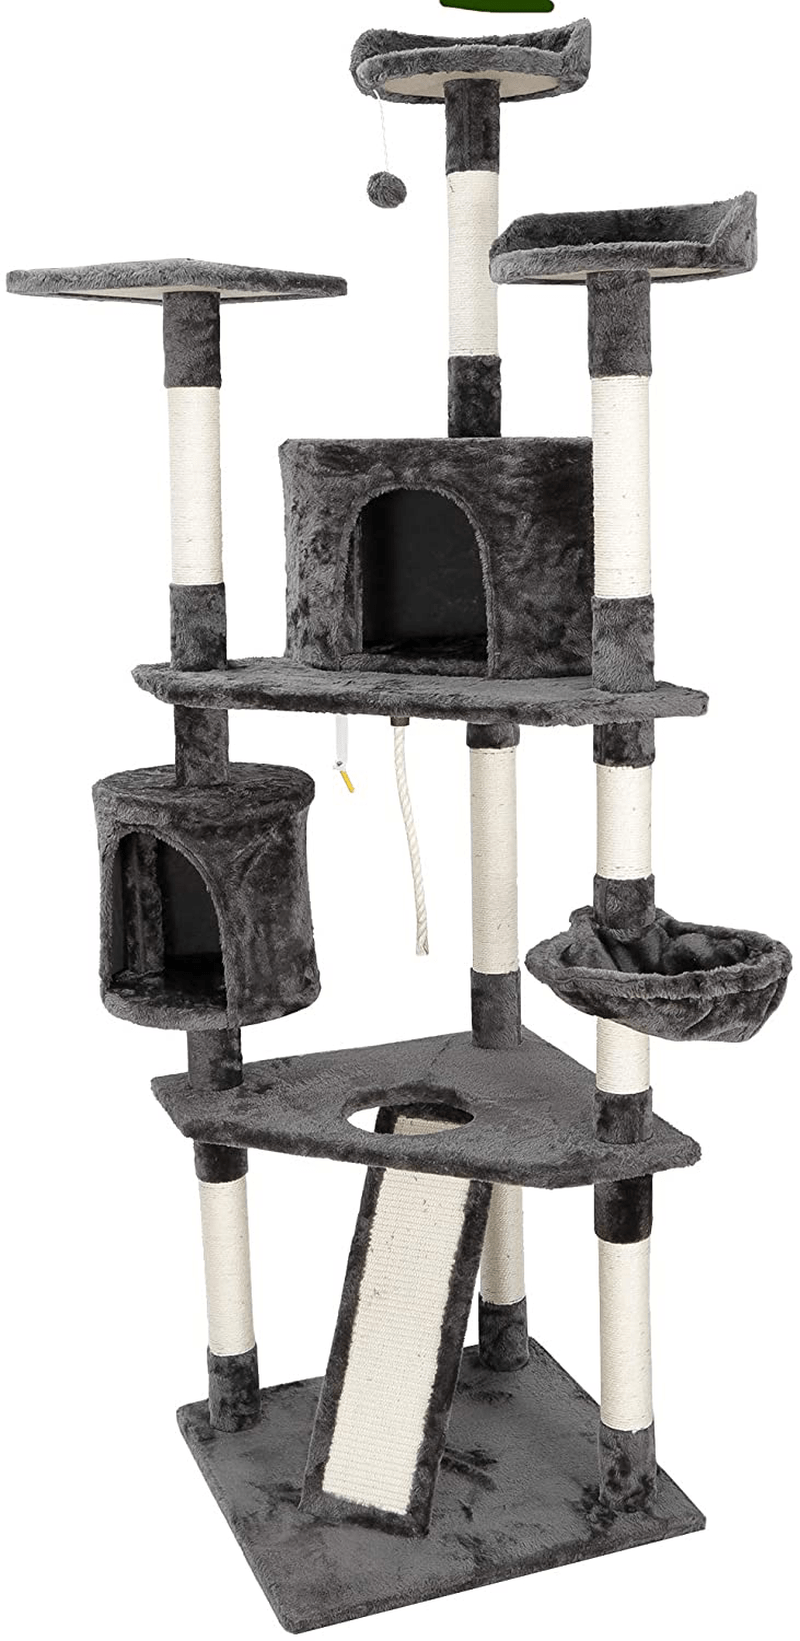 79 Inches Multi-Level Cat Tree Tower with Scratching Posts Perch Hammock Pet Furniture Kitten Activity Tower Kitty Play House